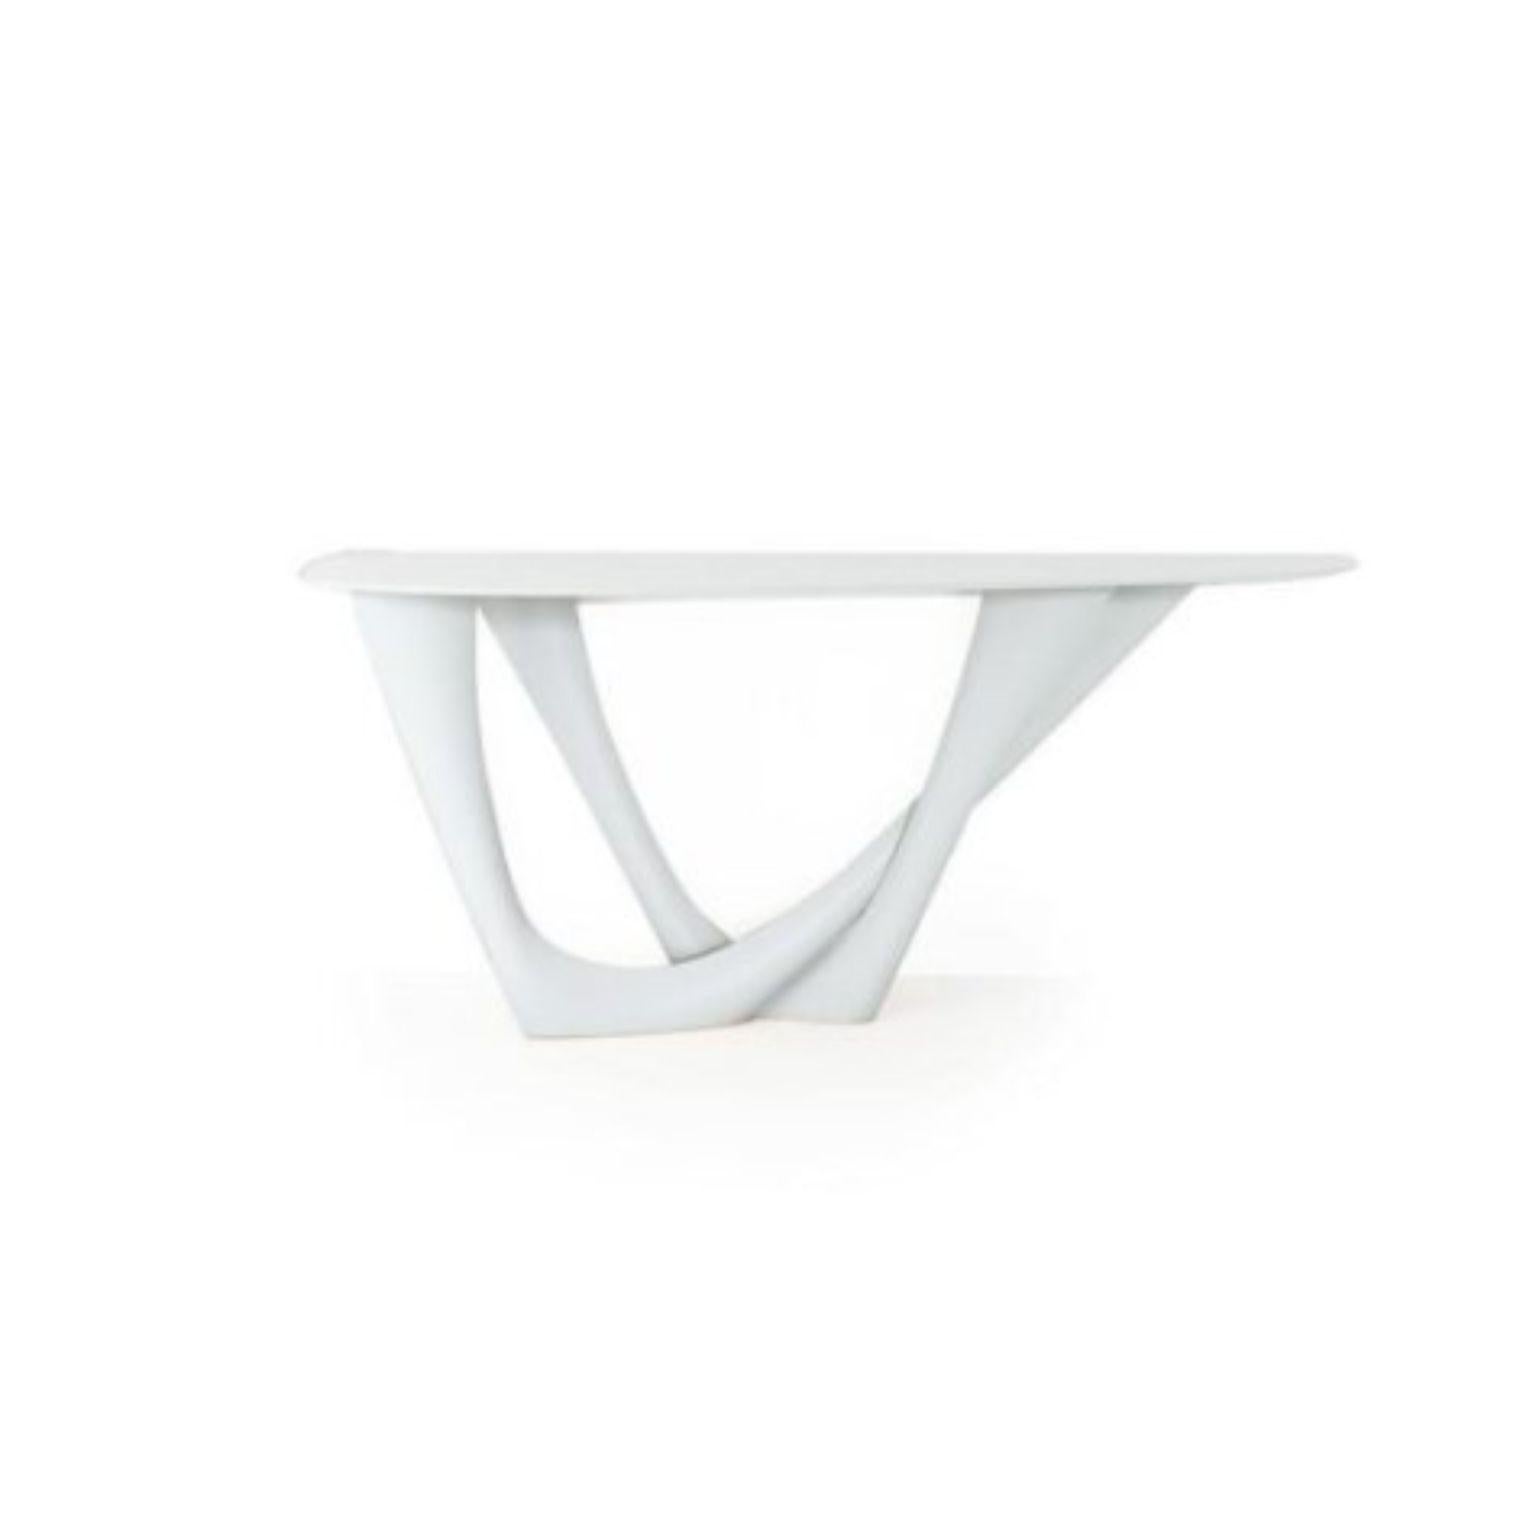 White matt G-console duo steel base and top by Zieta
Dimensions: D 56 x W 168 x H 75 cm 
Material: Steel.
Also available in different colors and dimensions.

G-Console is another bionic object in our collection. Created for smaller spaces, it gives